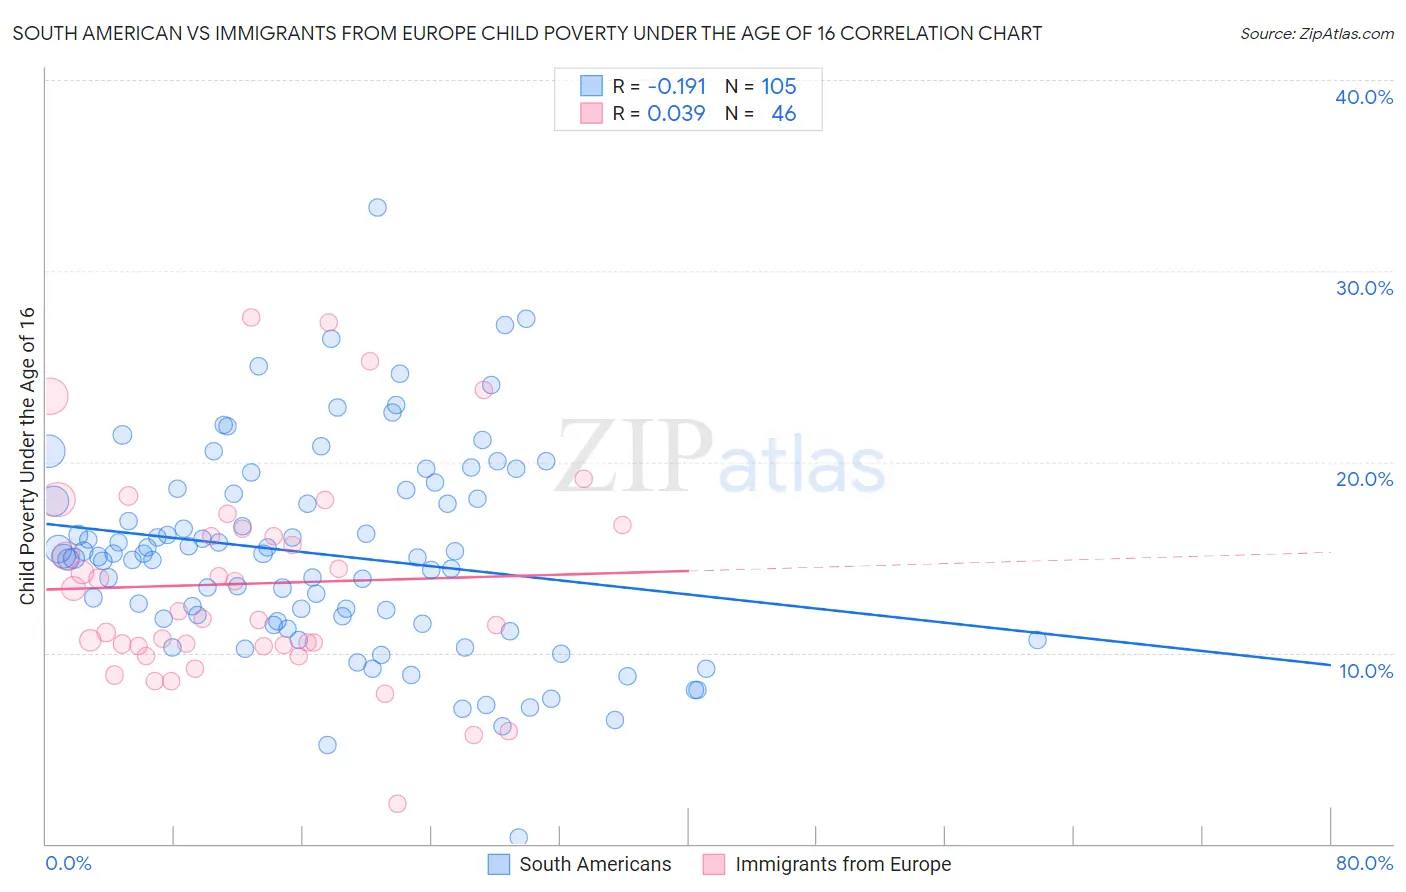 South American vs Immigrants from Europe Child Poverty Under the Age of 16